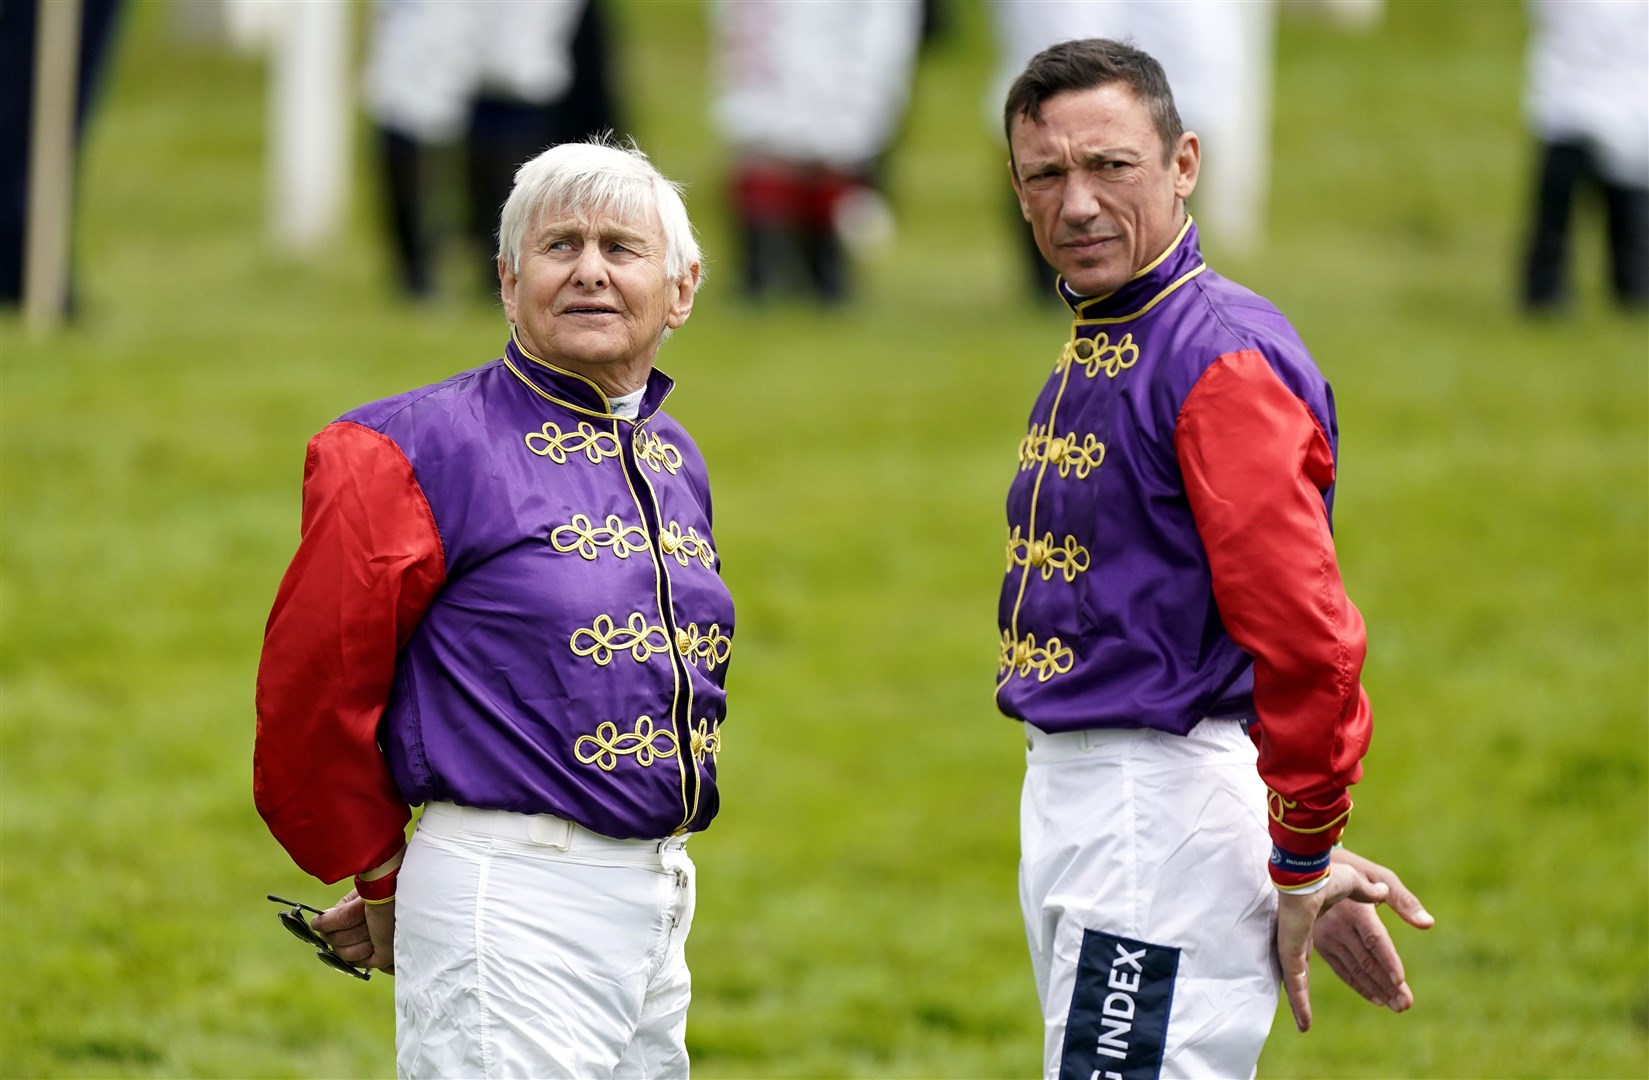 Willie Carson (left) and Frankie Dettori on Derby Day (Andrew Matthews/PA)